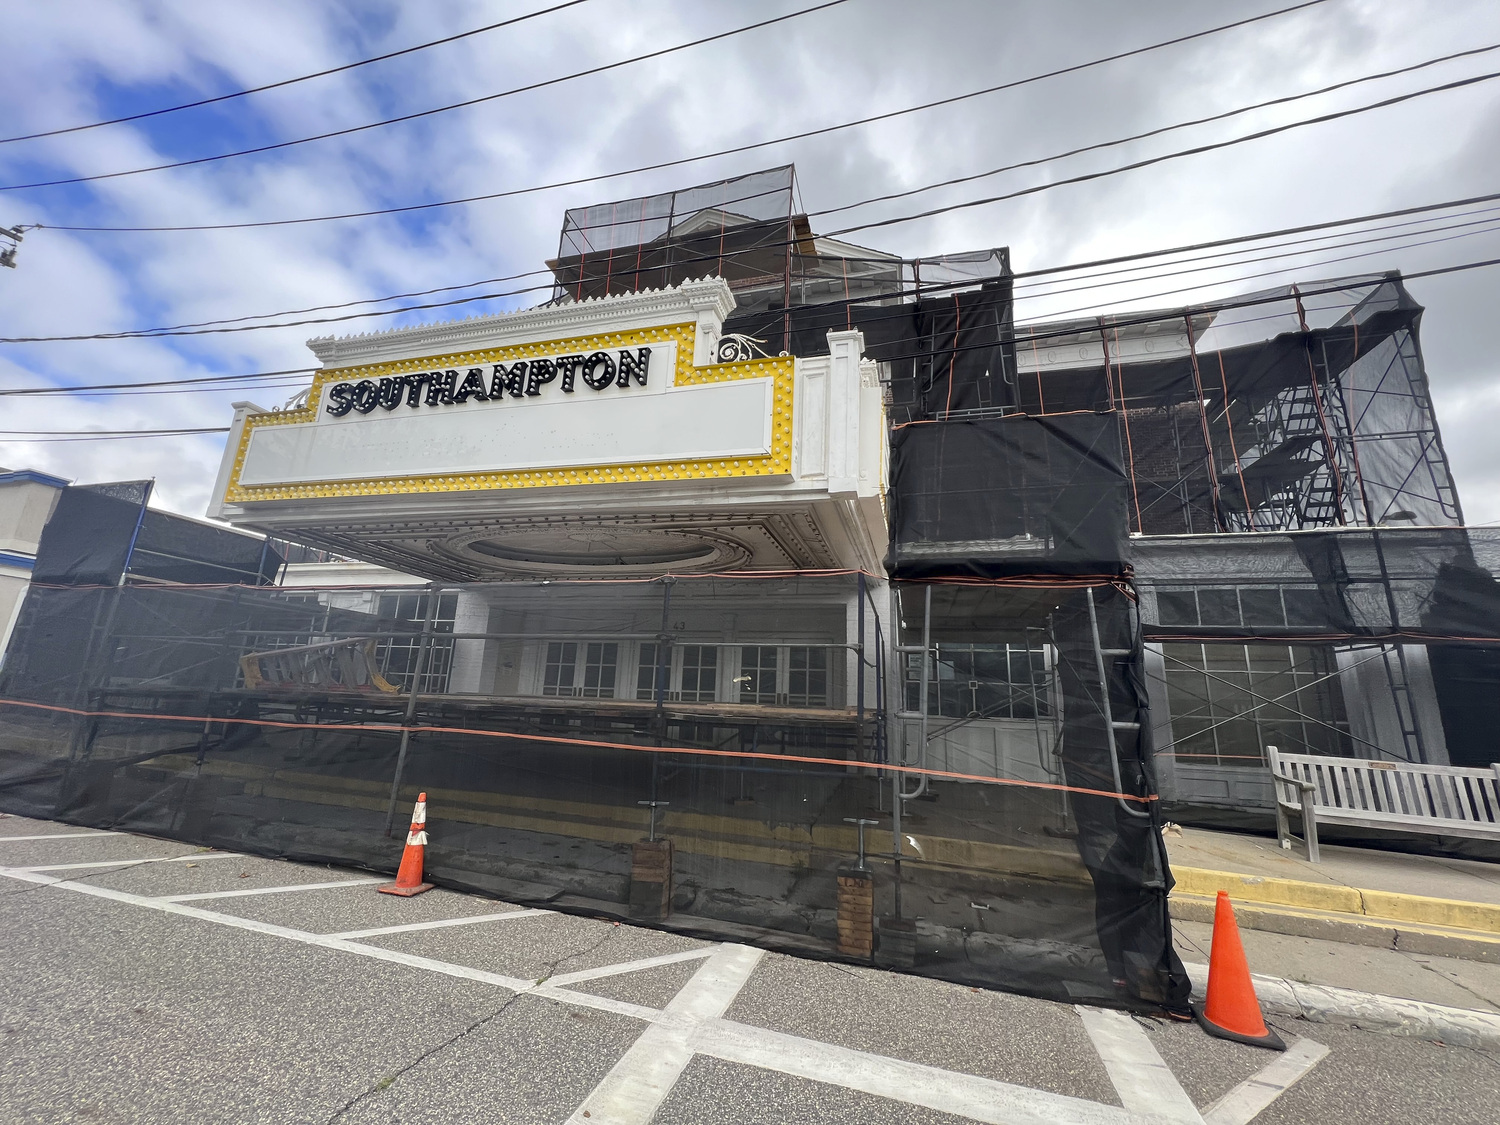 Scaffolding and netting have recently gone up around the Southampton movie theater on Hill Street.  DANA SHAW